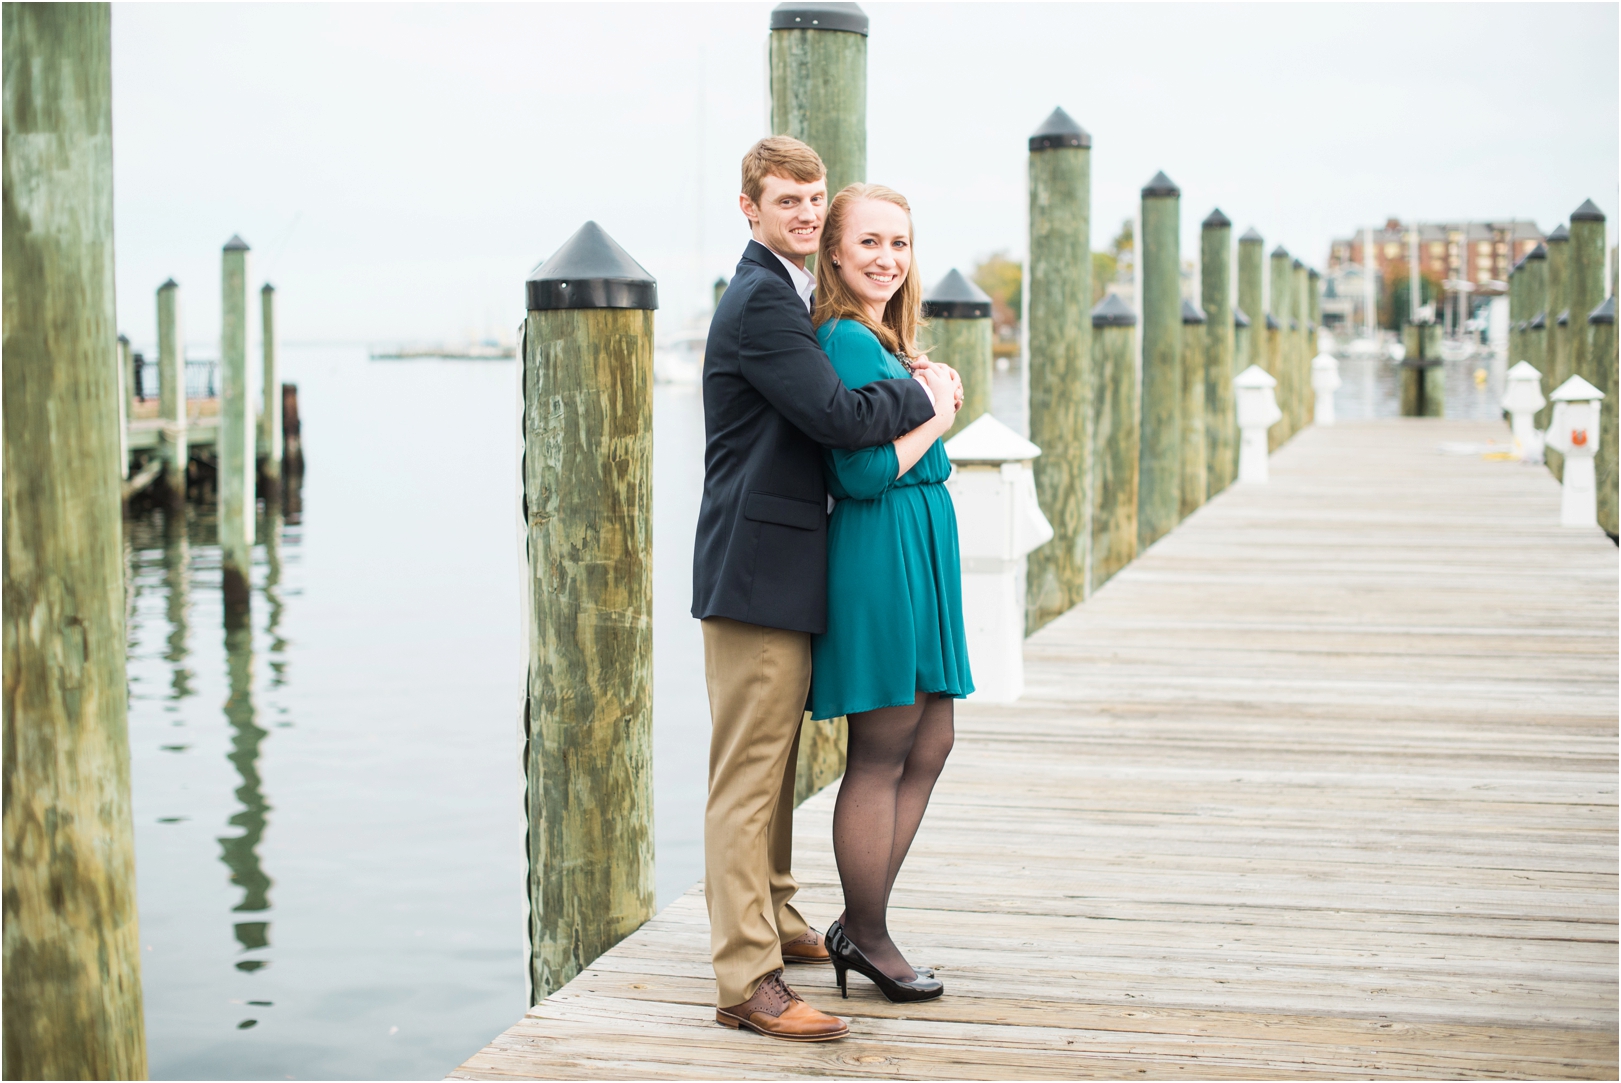 Downtown Annapolis Docks engagement session on the water 